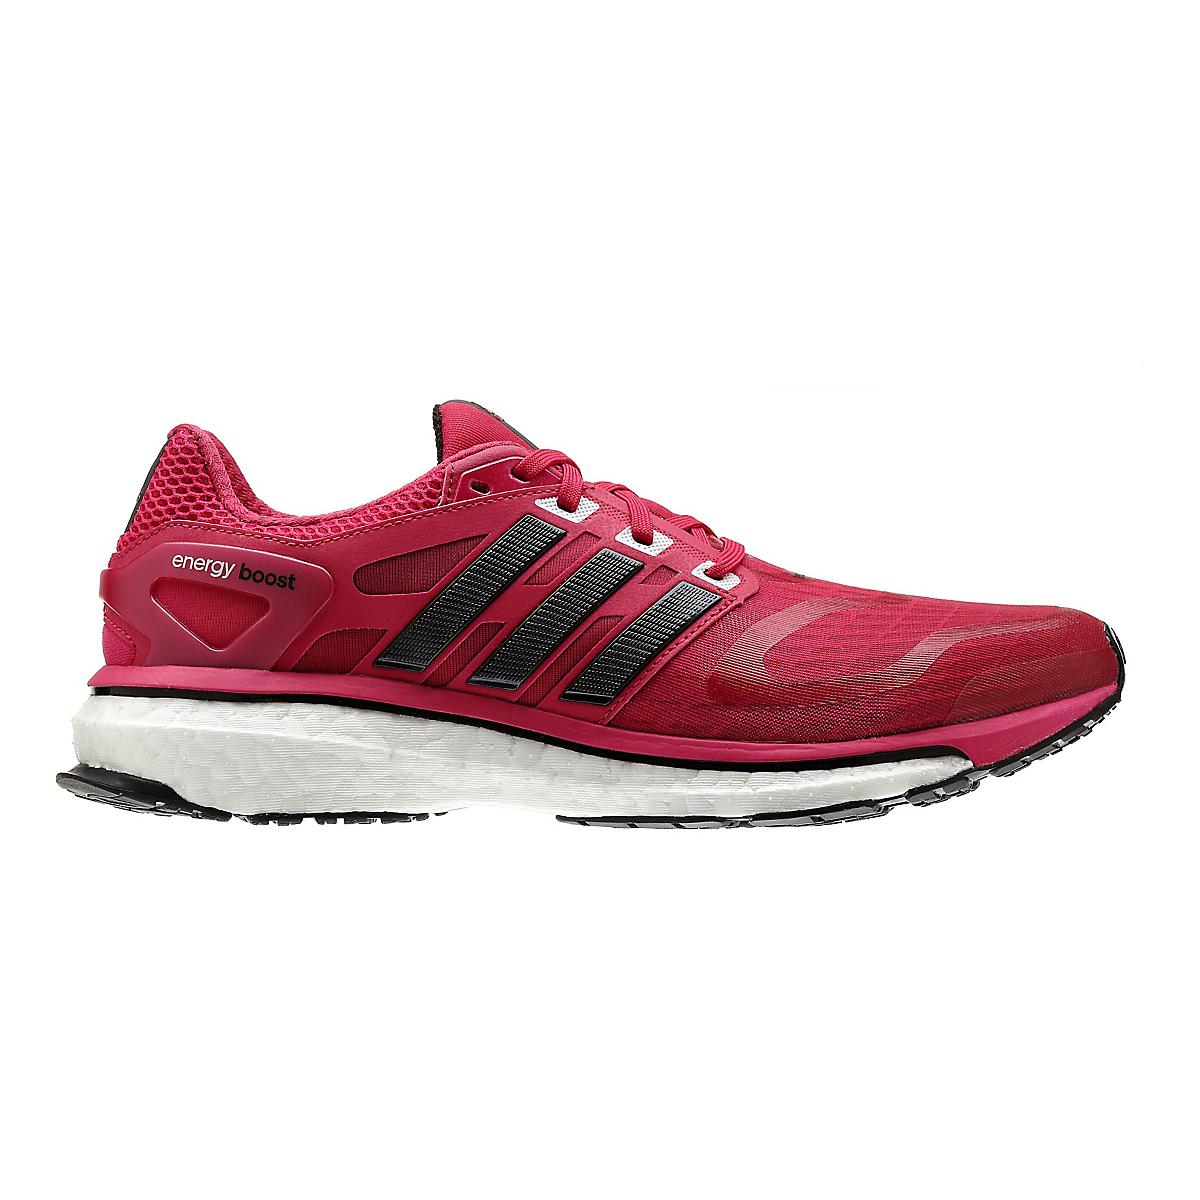 Womens adidas Energy Boost Running Shoe at Road Runner Sports